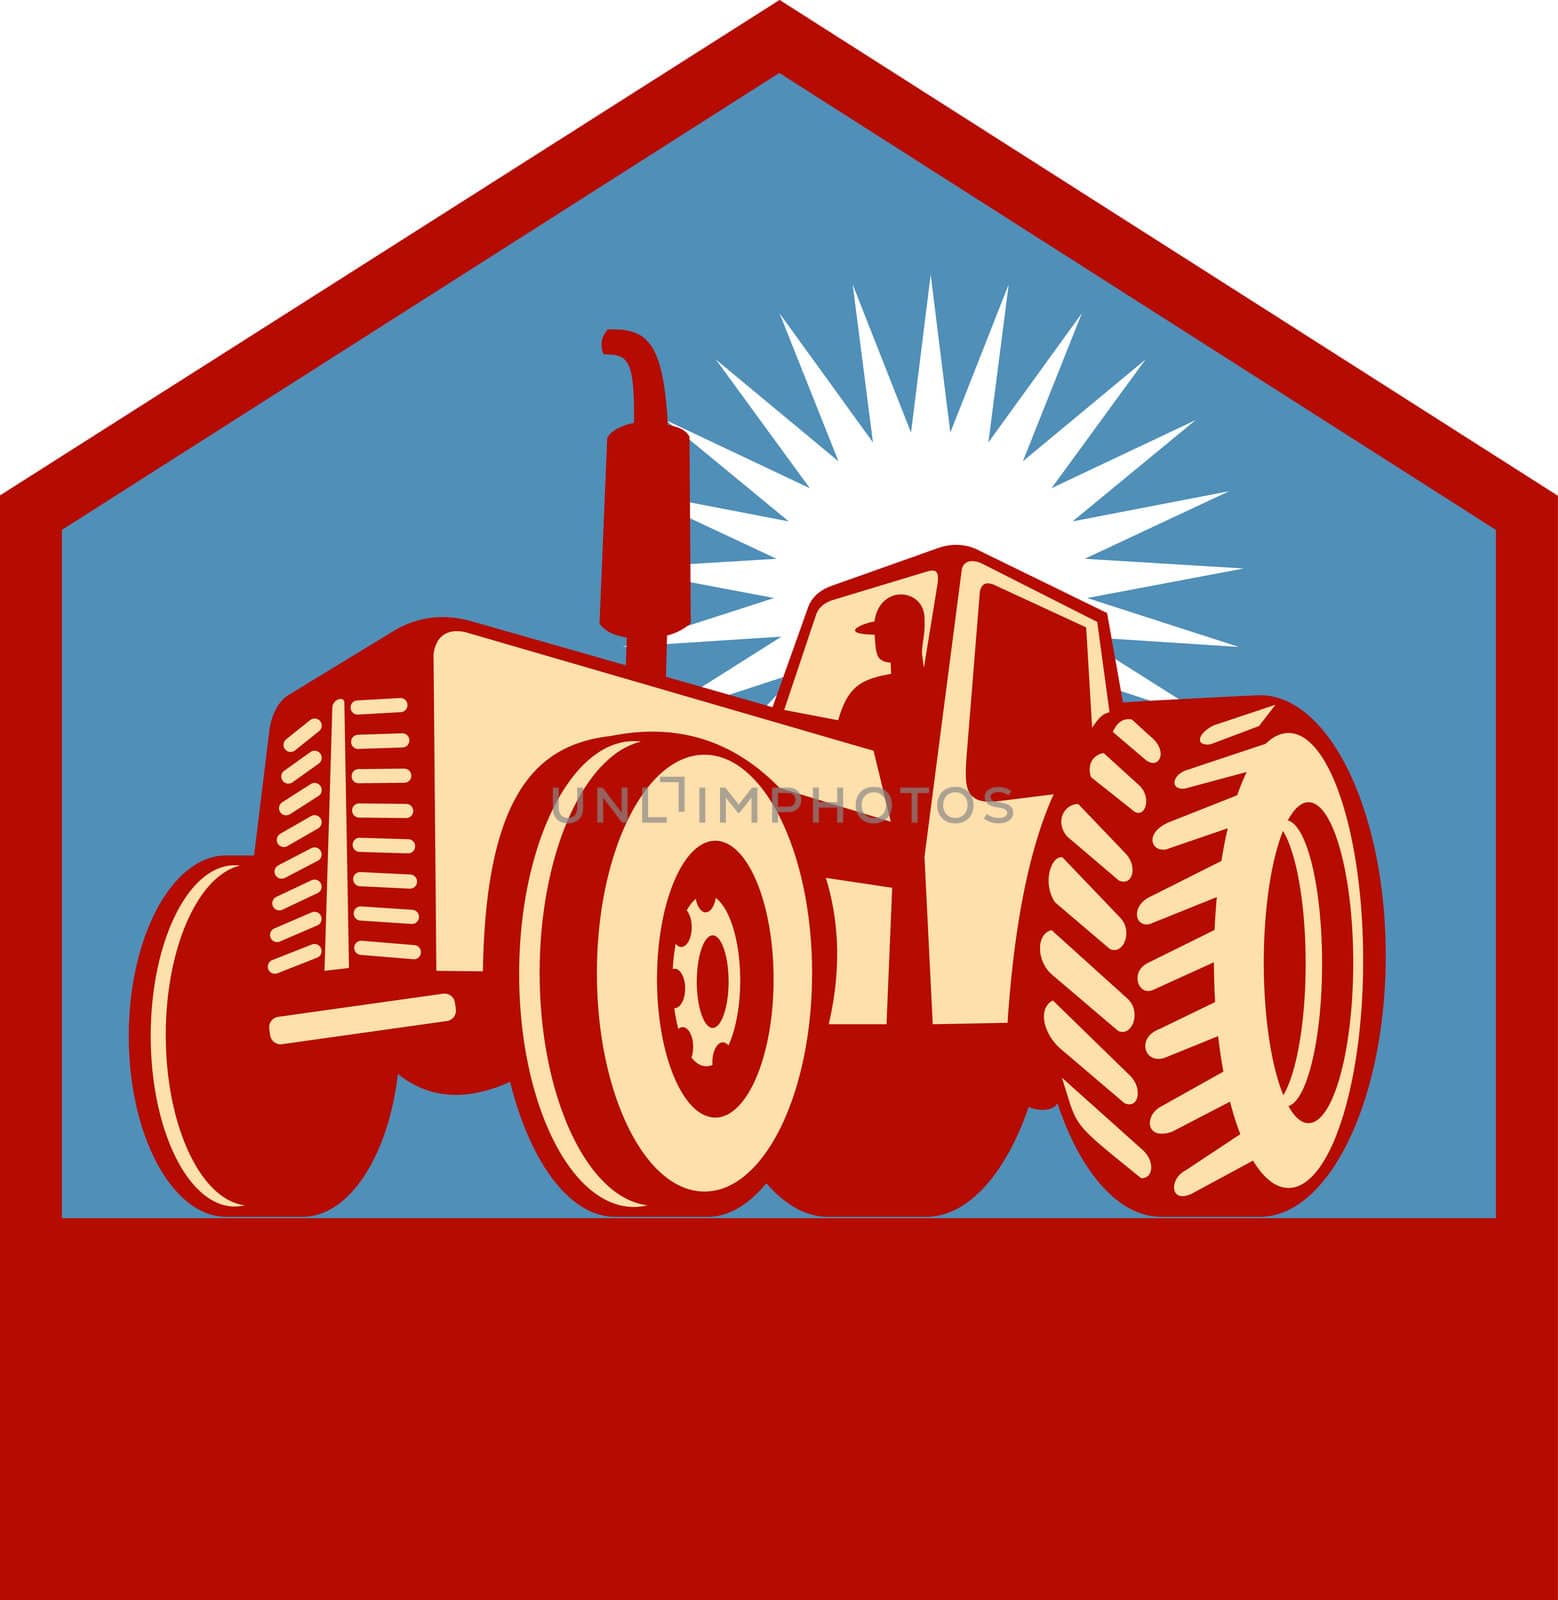 Imagery shows a retro styled tractor silhouette viewed form a low angle enclosed in a chevron. Done in three (3) colors.